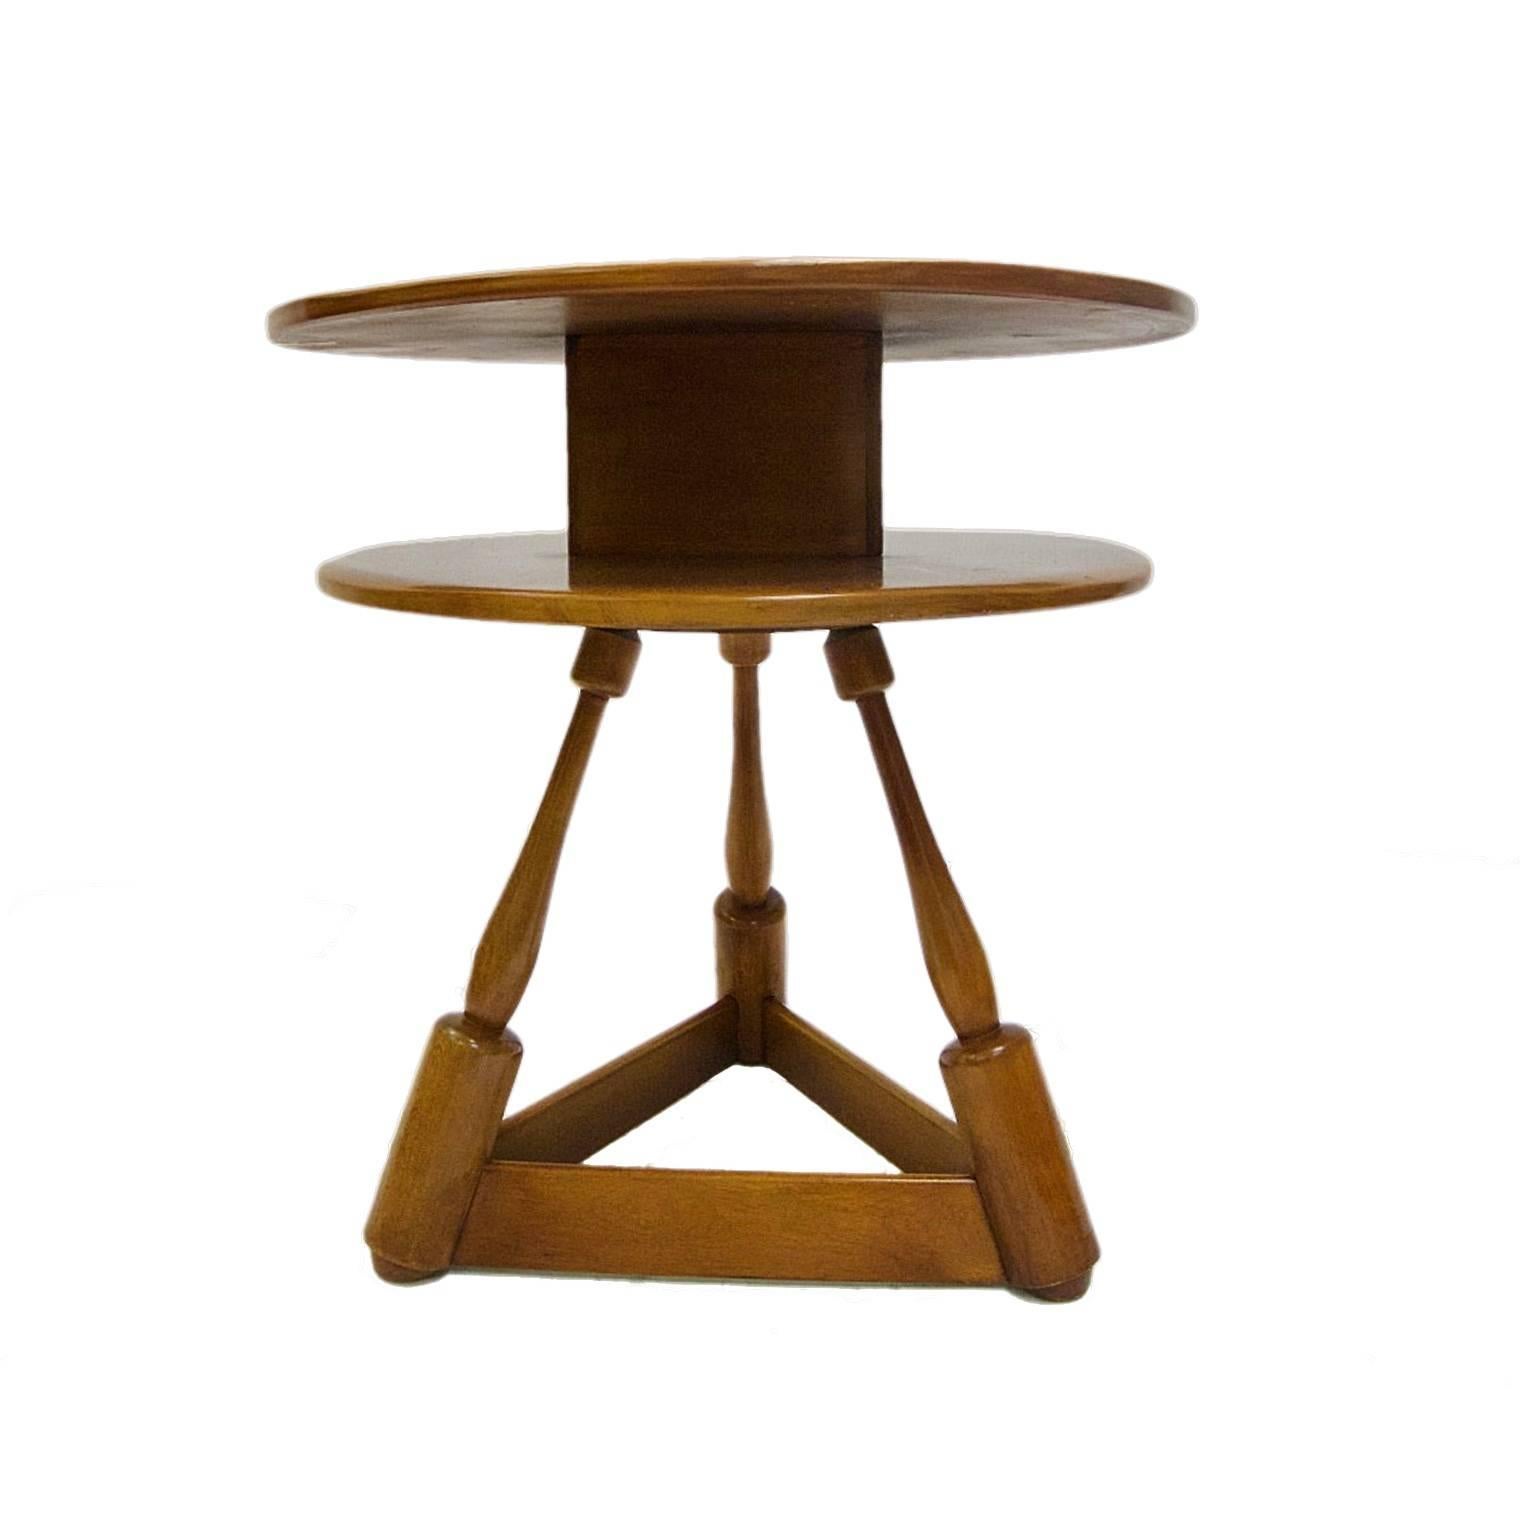 American Hard Rock Maple Lamp / Side Table by Herman De Vries for Cushman Furniture